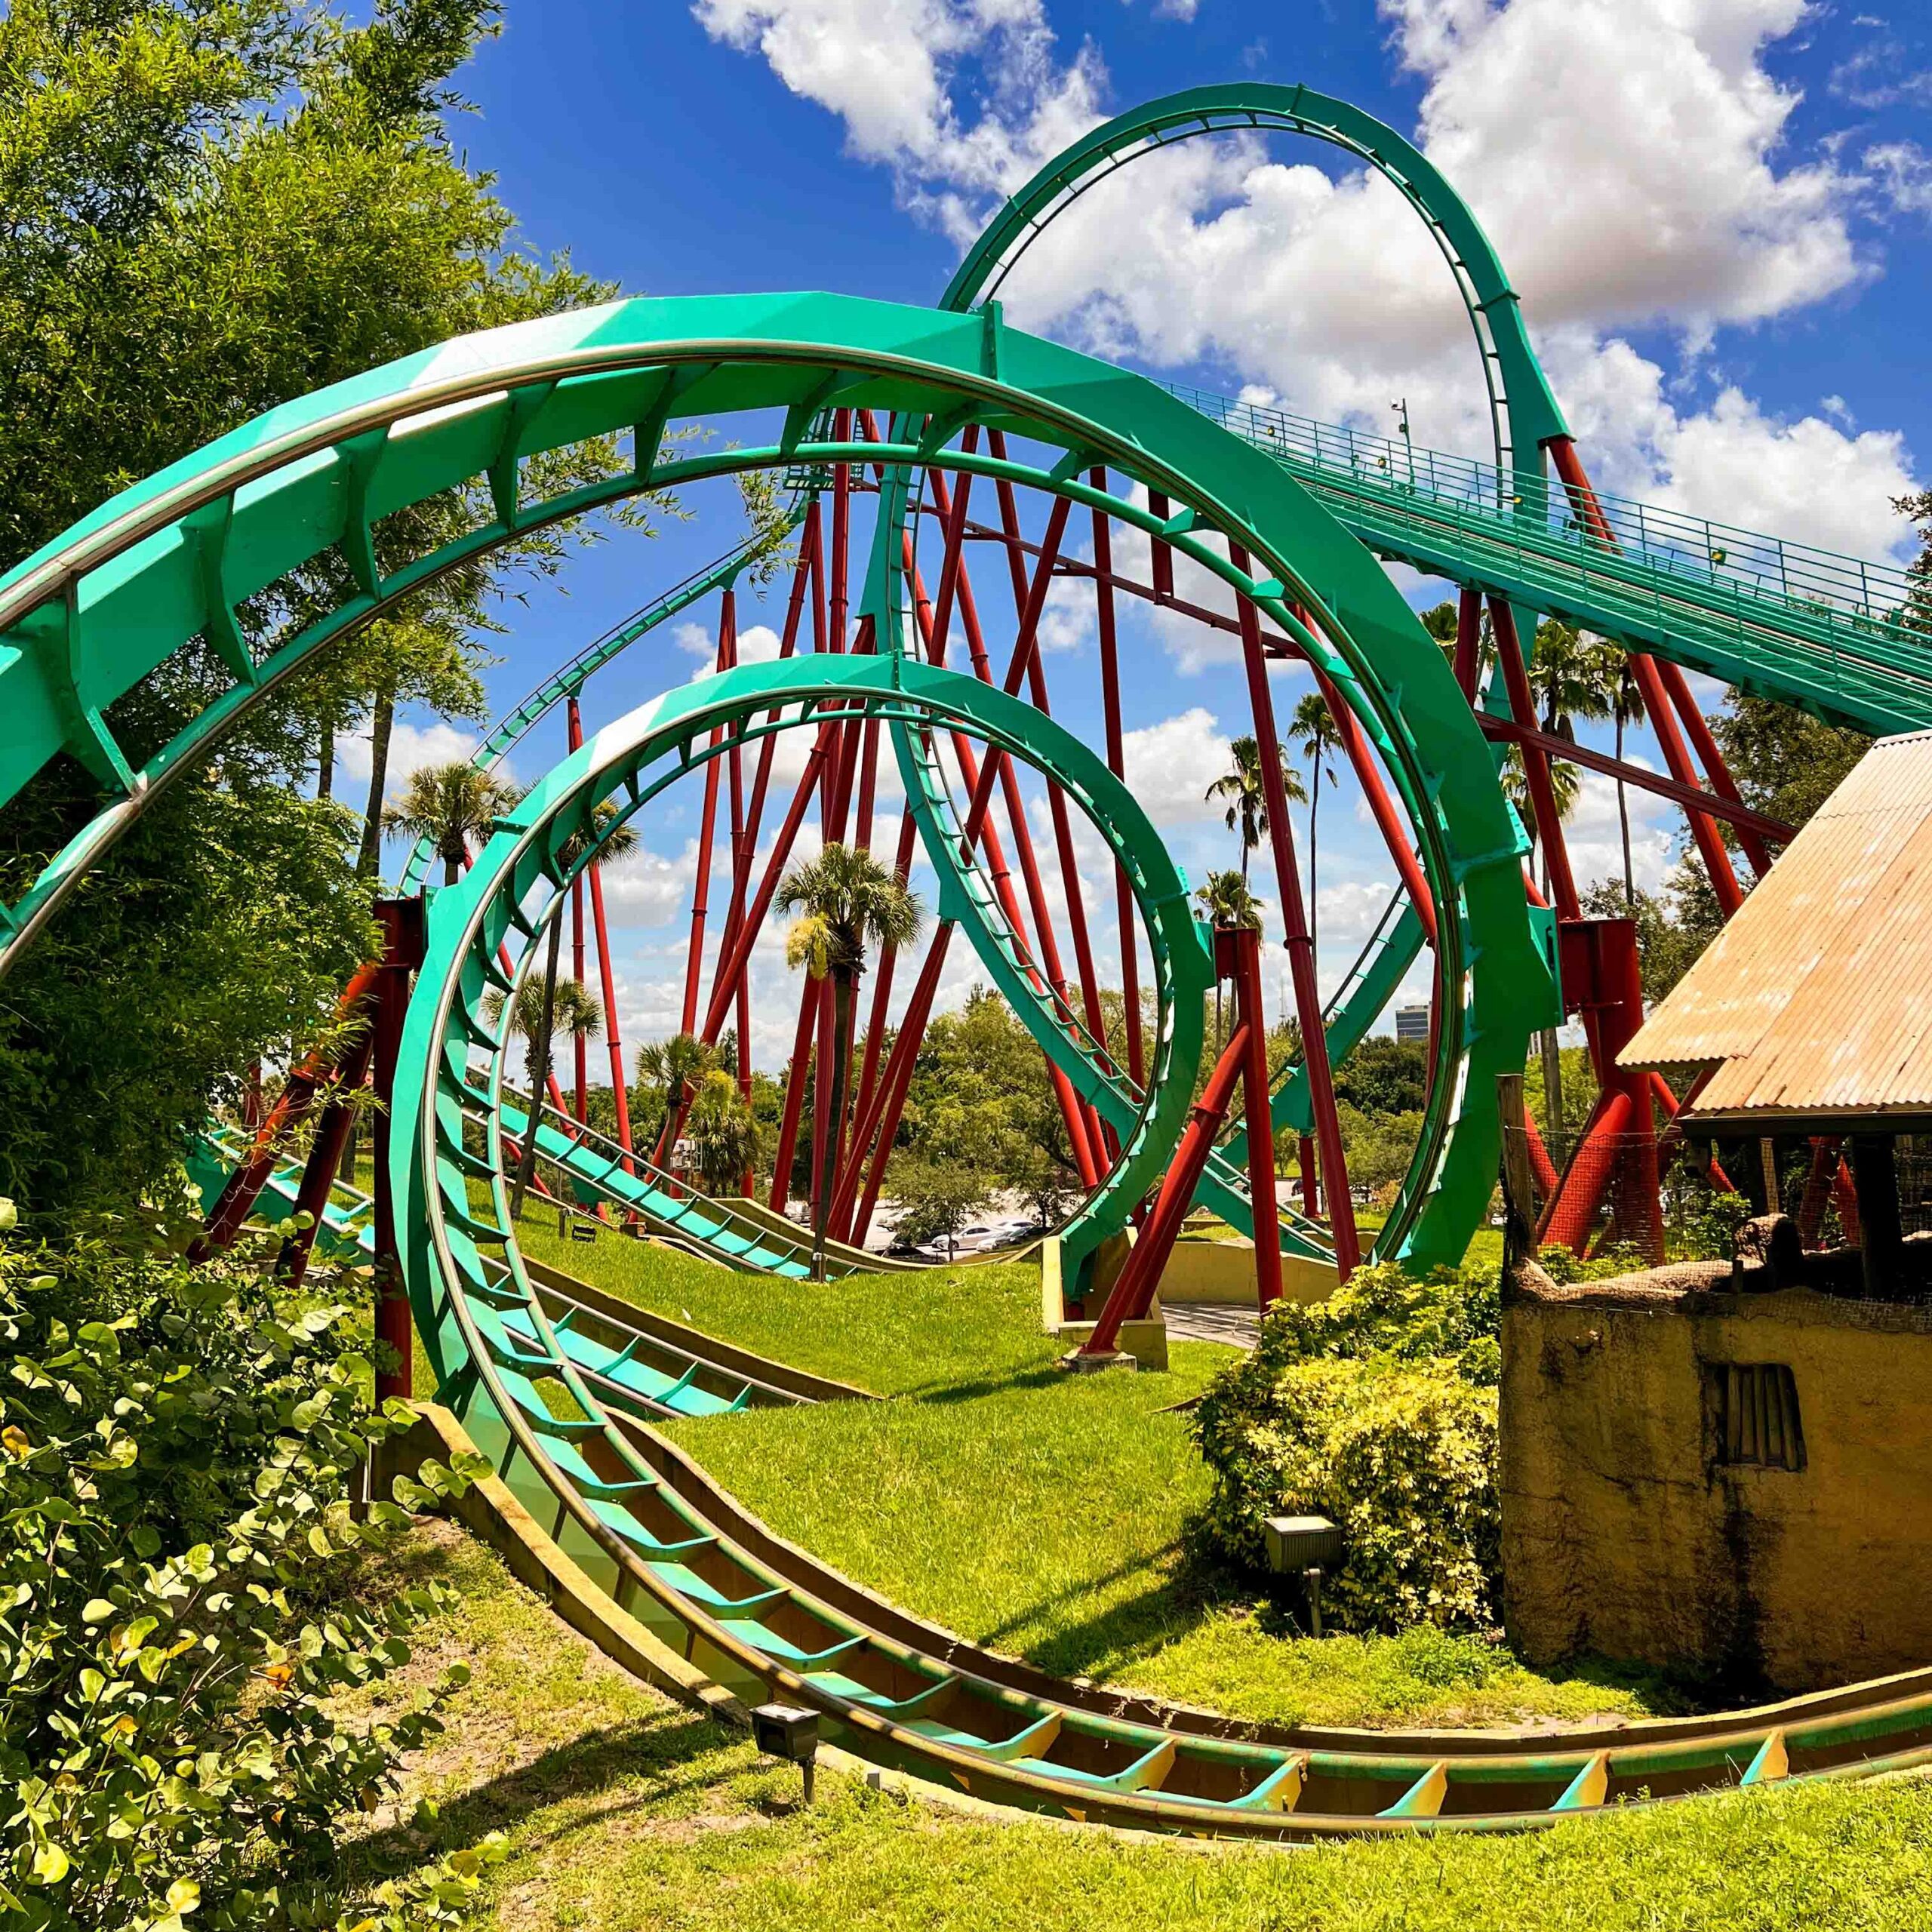 From Tame To Thrilling: The Roller Coasters of Busch Gardens